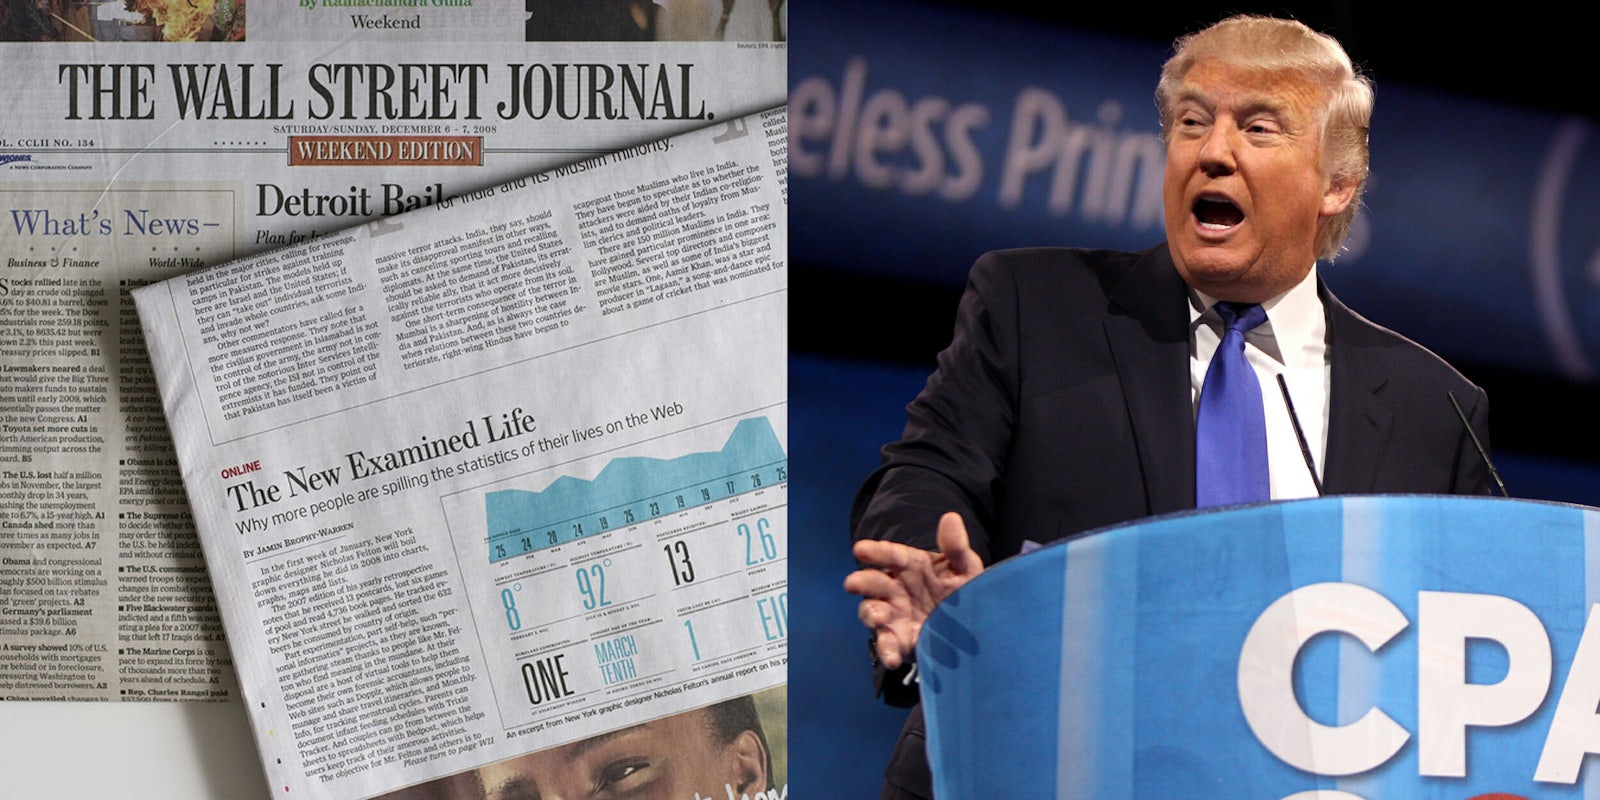 The Wall Street Journal and Donald Trump